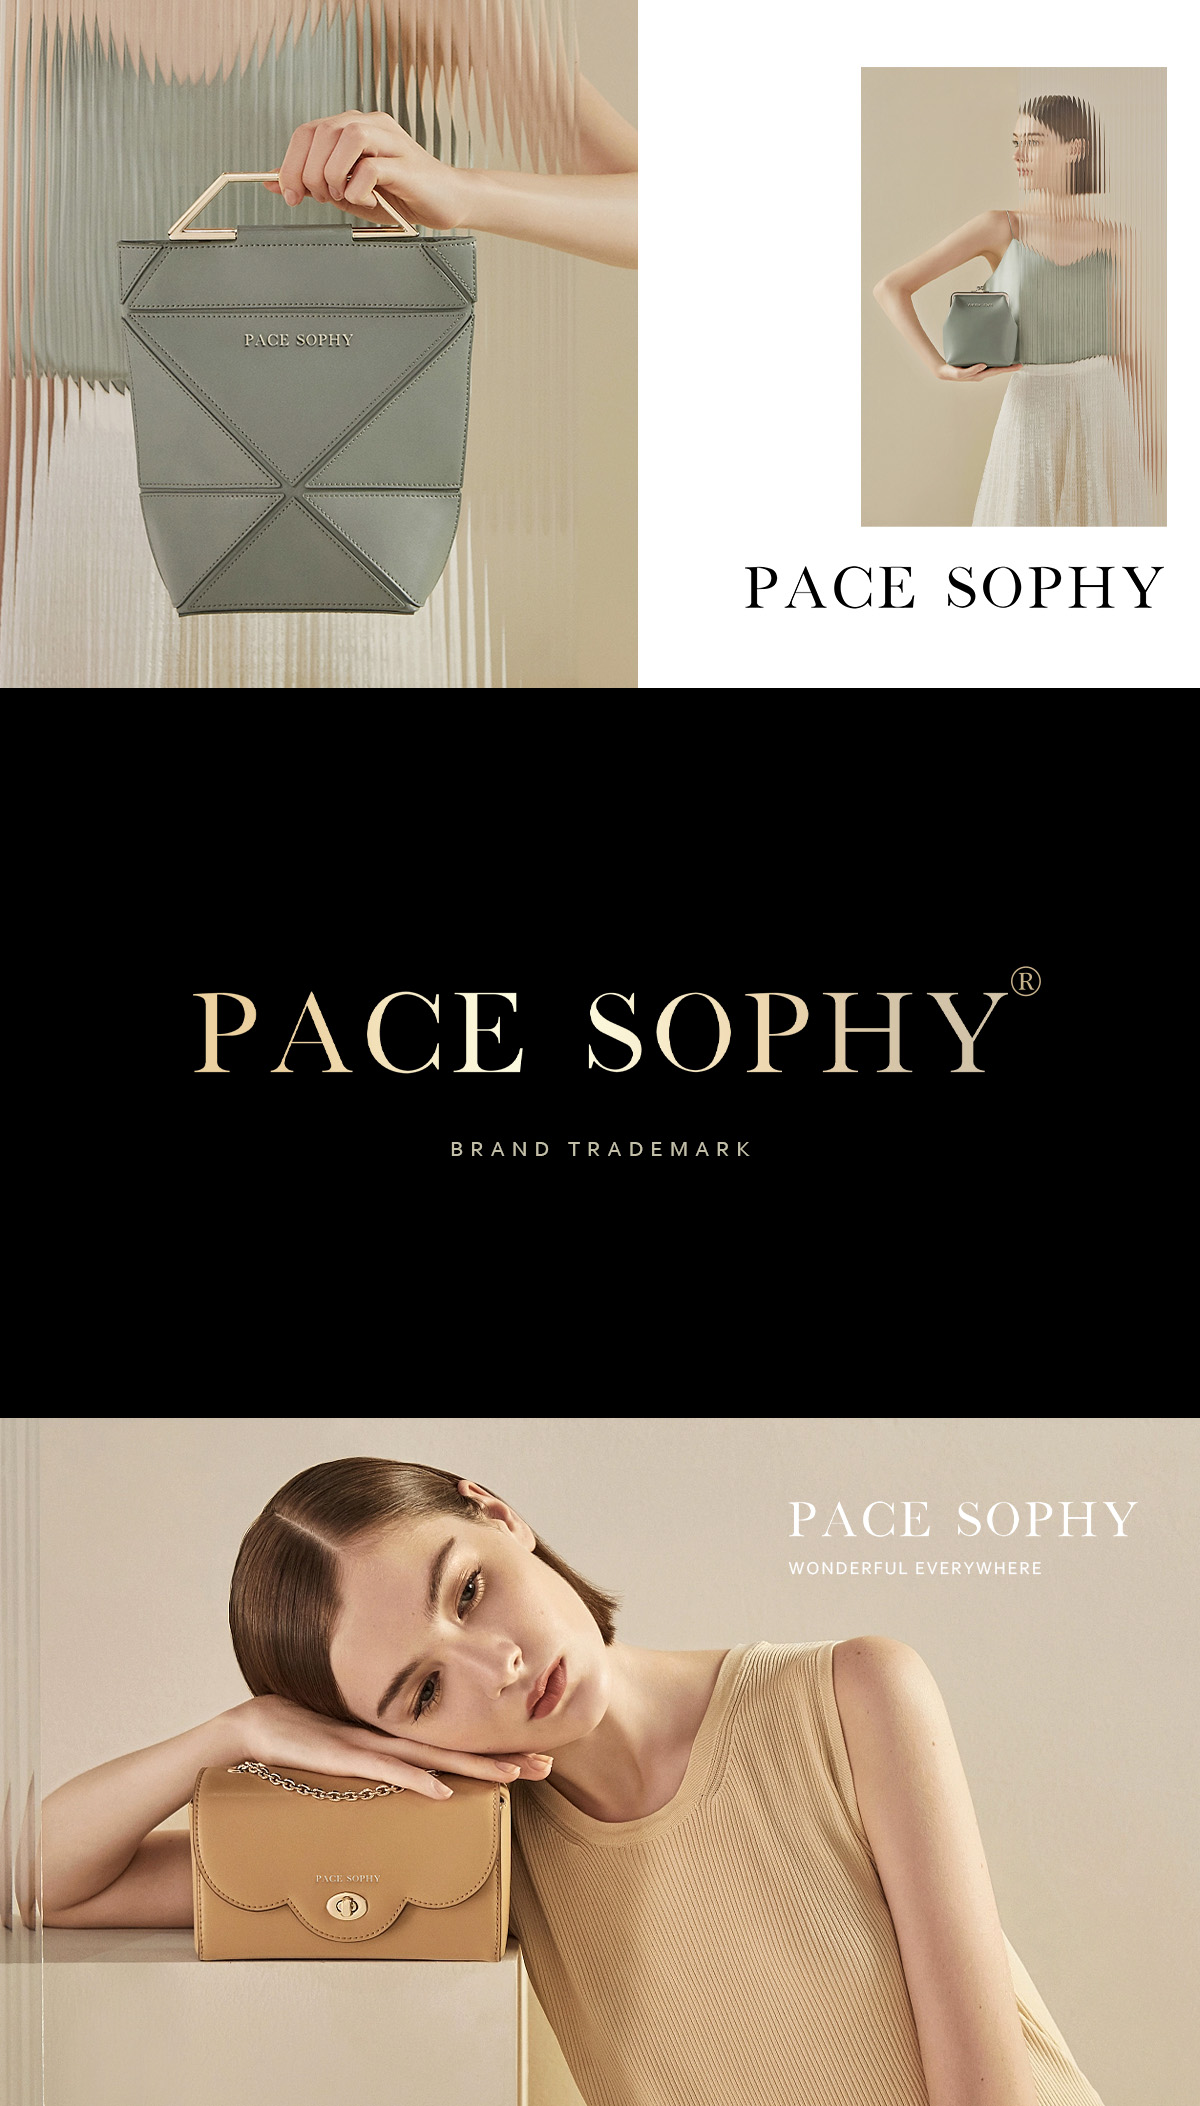 PACE SOPHY